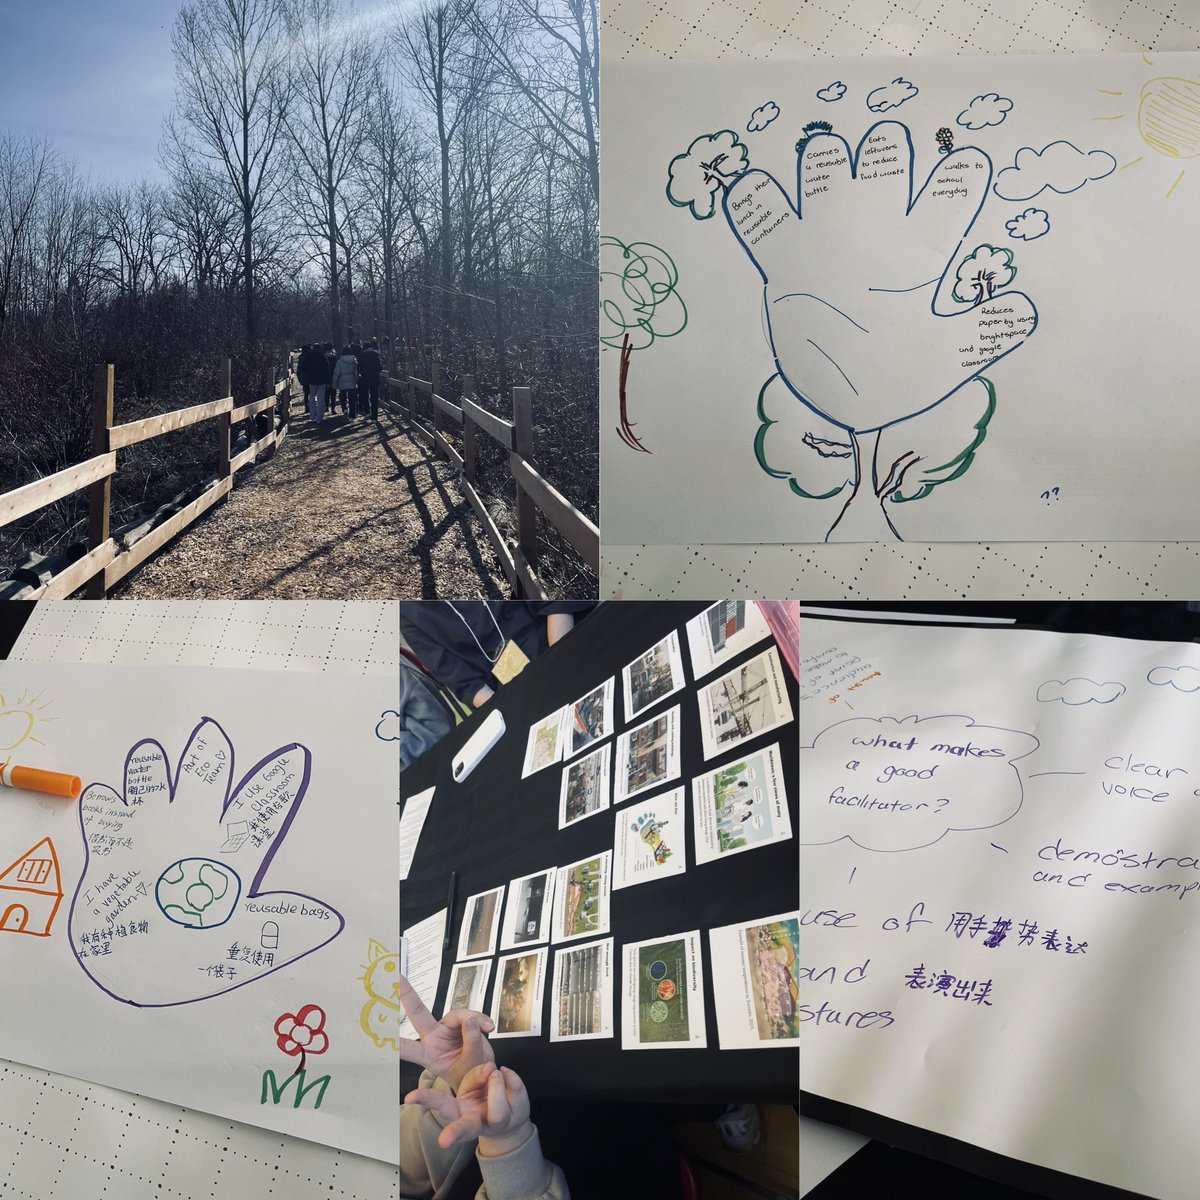 Had an amazing day with some of our Grade 8’s this past week! Thank you @EcoSchoolsTDSB for hosting us. Can’t wait to see what the students come up with after the break, for our climate change event! Stay tuned! @BBPS_Principal